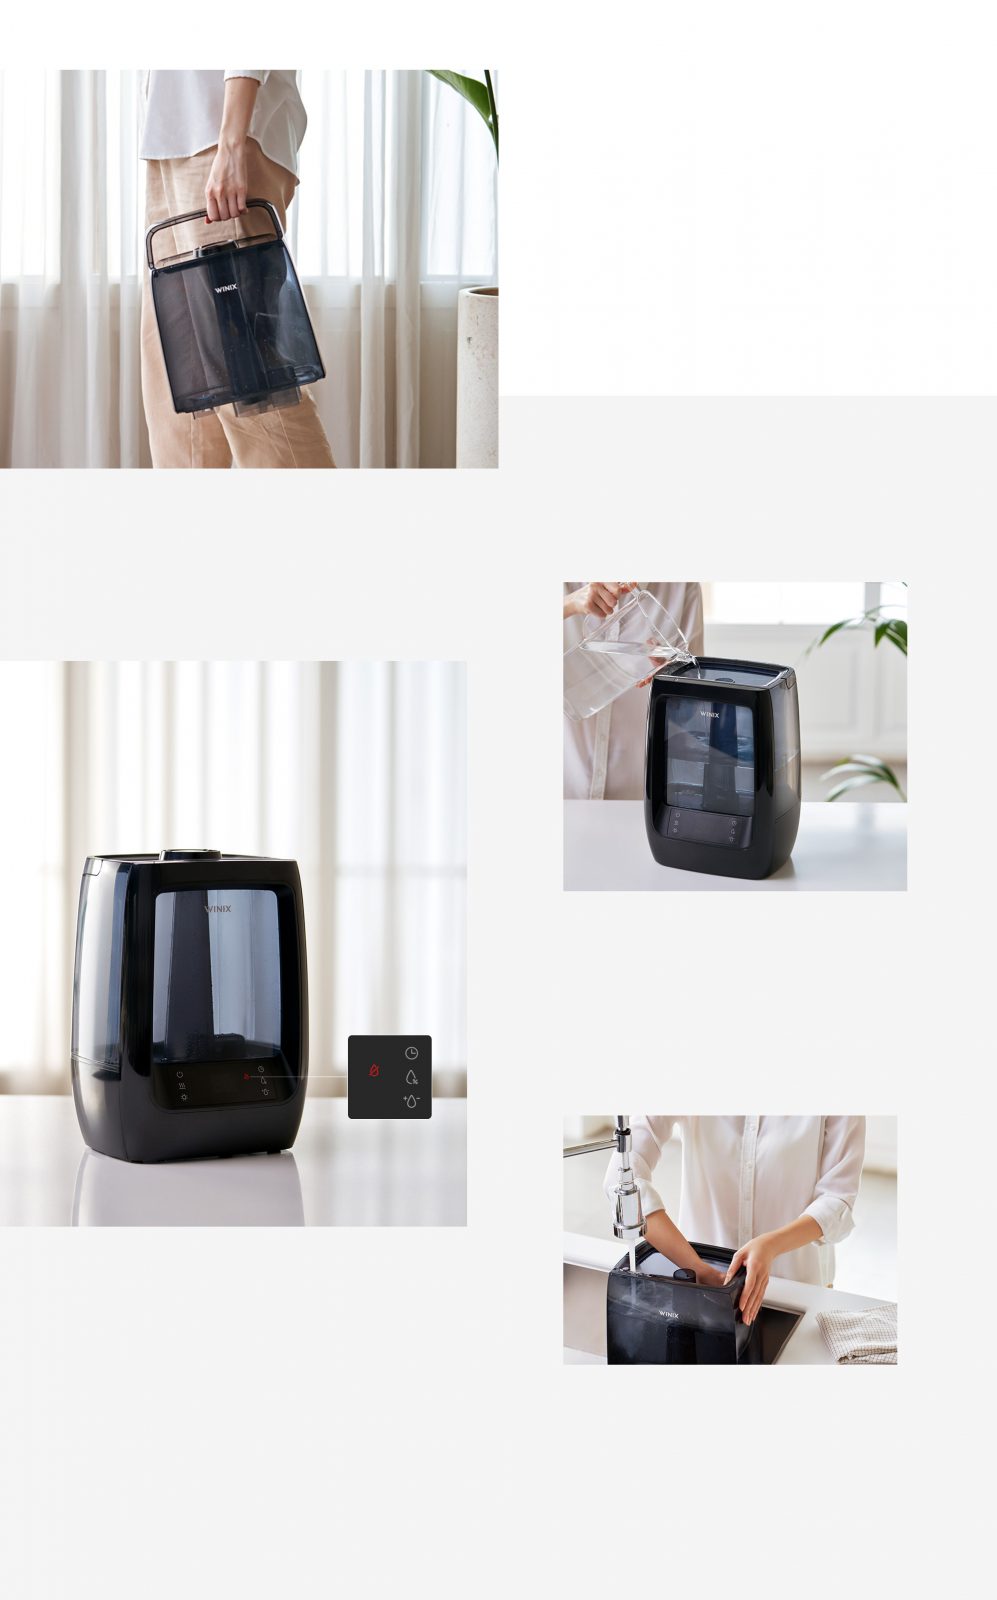 Four images of L200 humidifier being carried by handle, water being filled in the water tank, sitting on top of a table, and being cleaned under running faucet